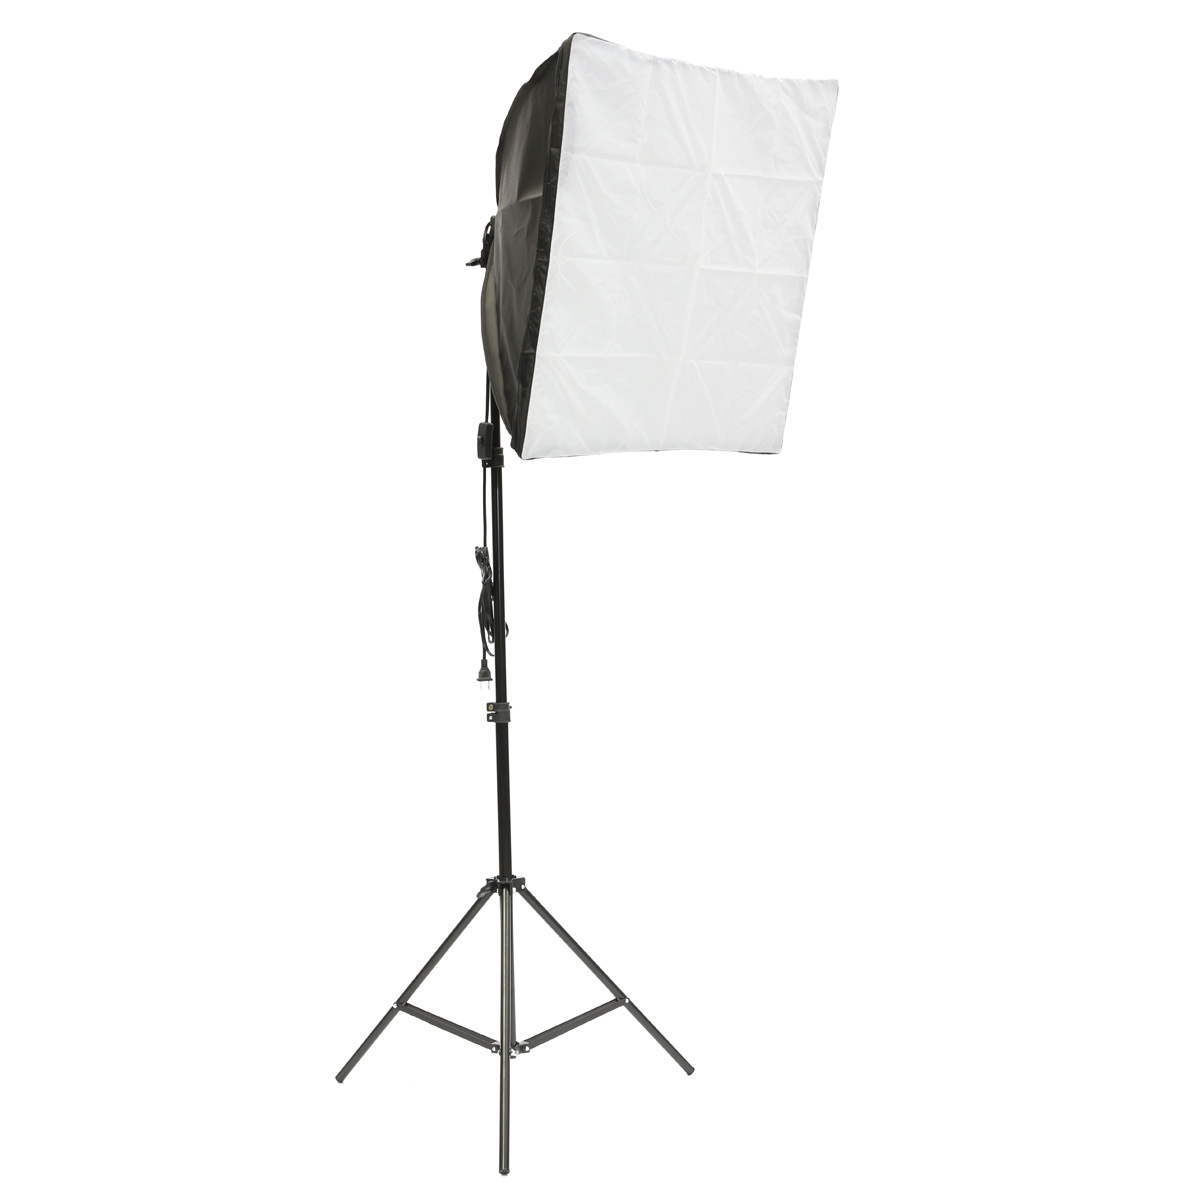 

Softbox Light Kit Photo Studio Video Stand Photography Continuous Lighting Kit